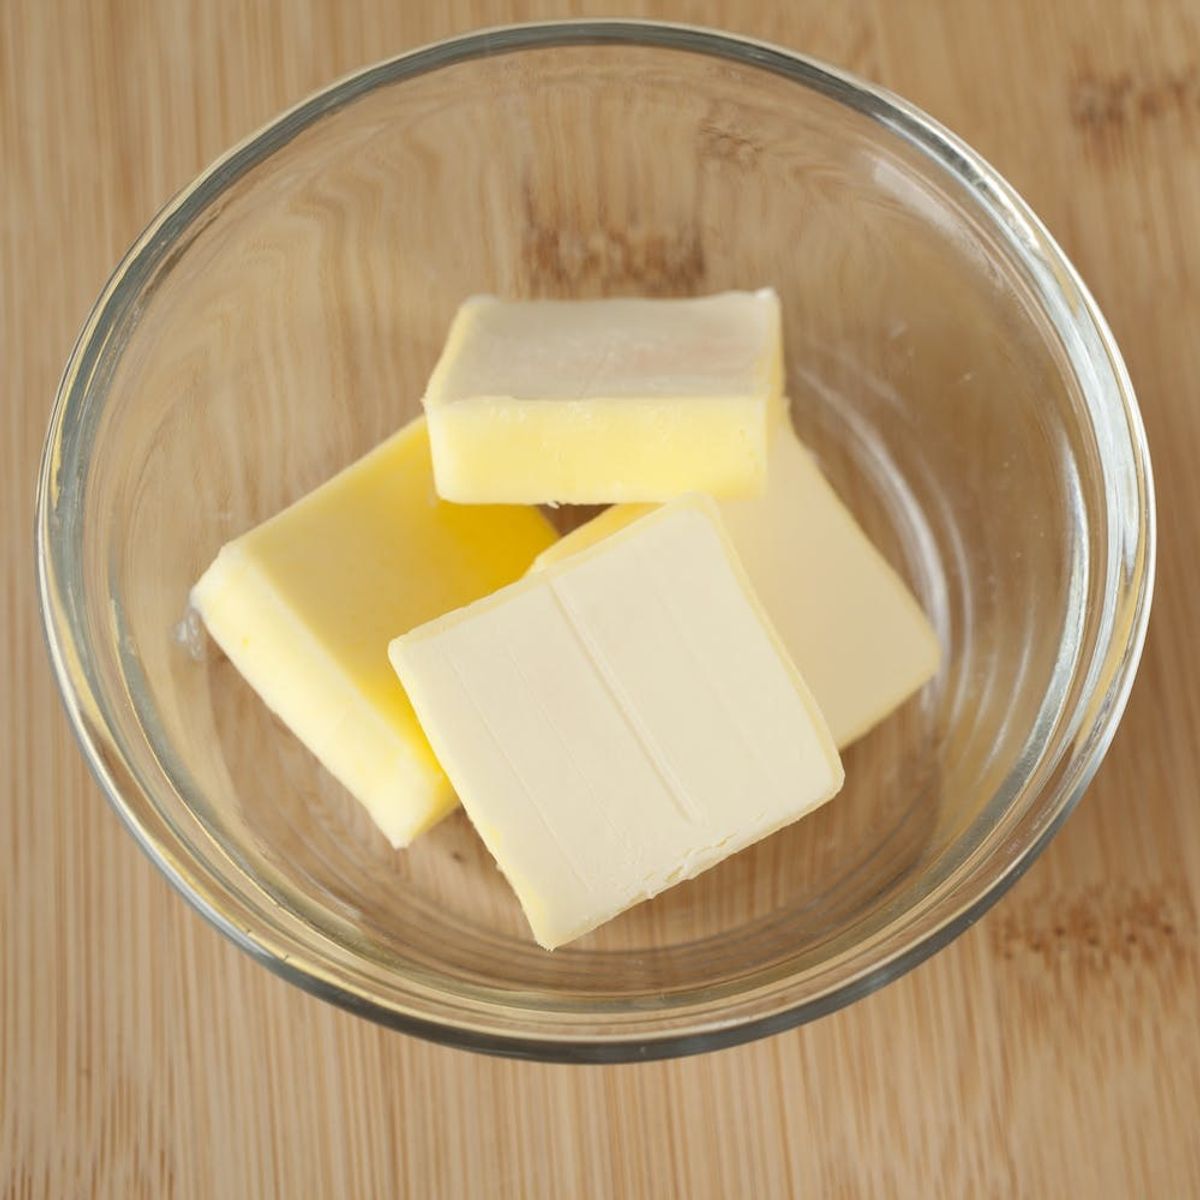 Foodies Rejoice: This Study Has Some Deliciously Awesome Claims About Butter